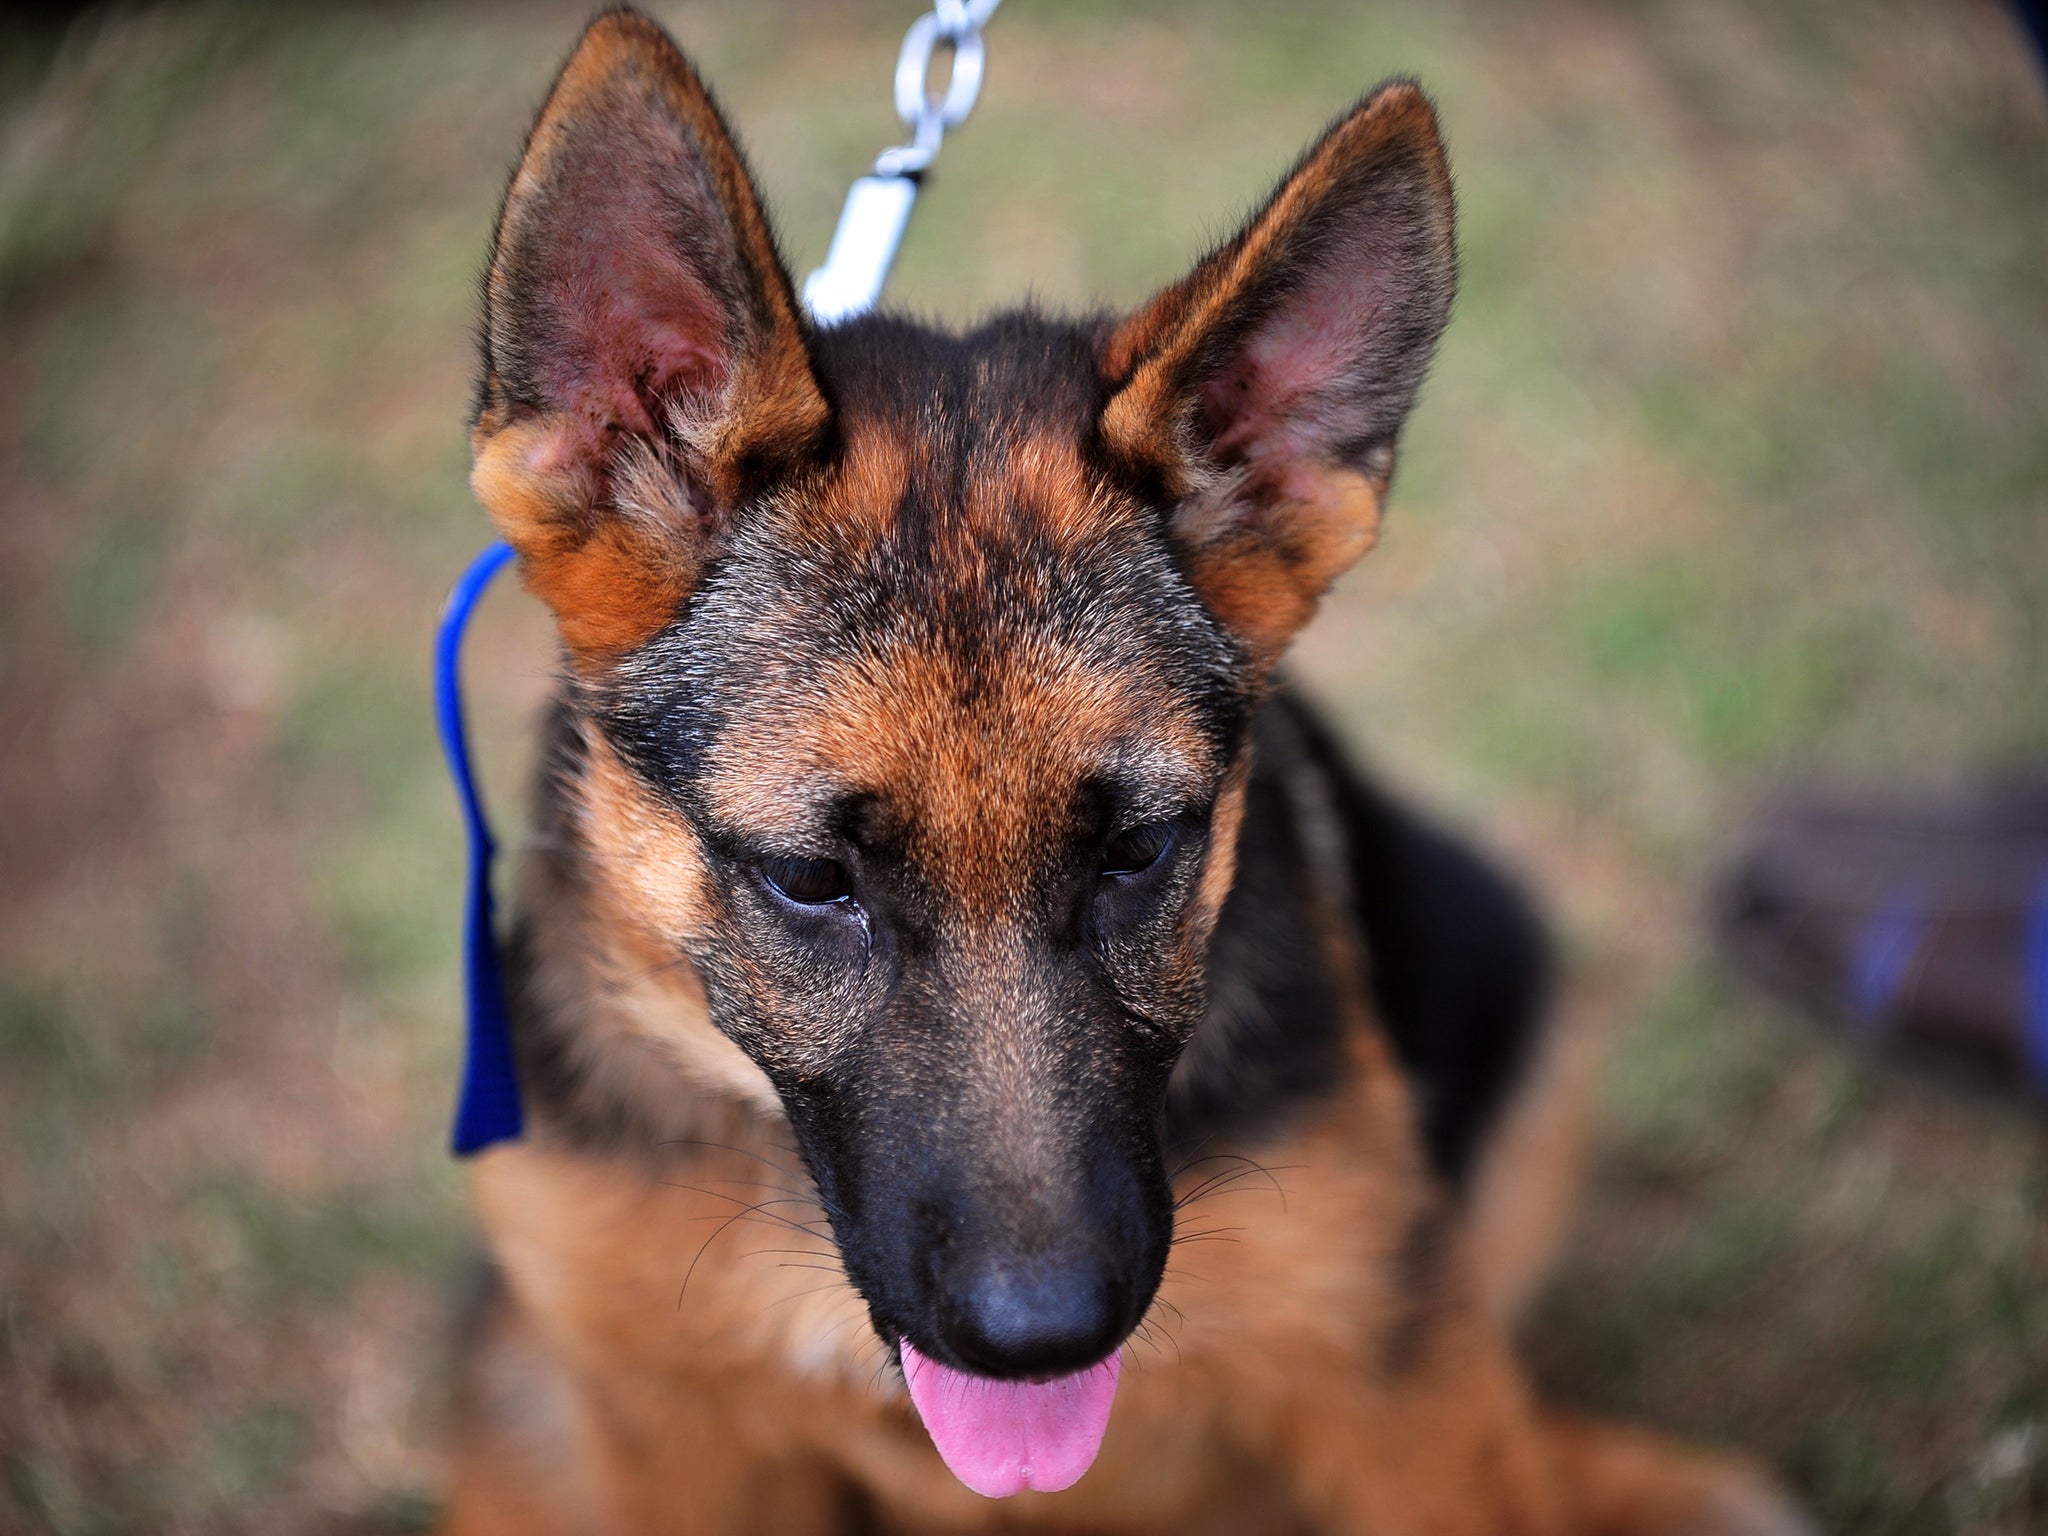 Today's German shepherds are bred to be considerably larger than 100 years ago